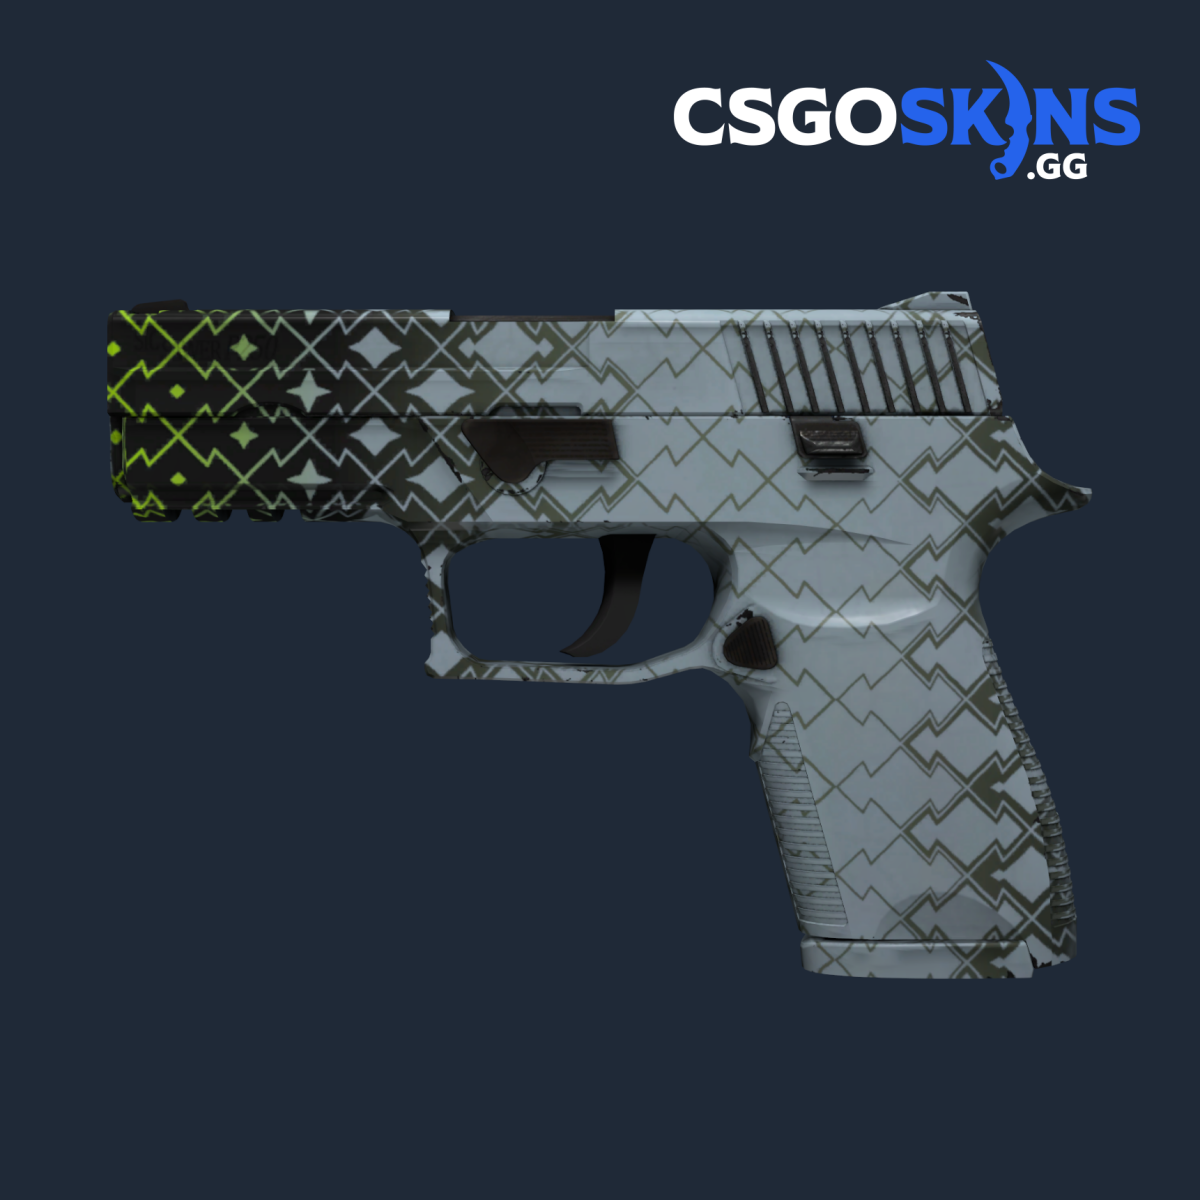 WAXPEER on X: 🔥 NEW CS:GO CASE IS OUT! 🔥 Prisma 2 Case has just been  added to the game, featuring 17 new skins, with the update which ended  Operation Shattered Web.